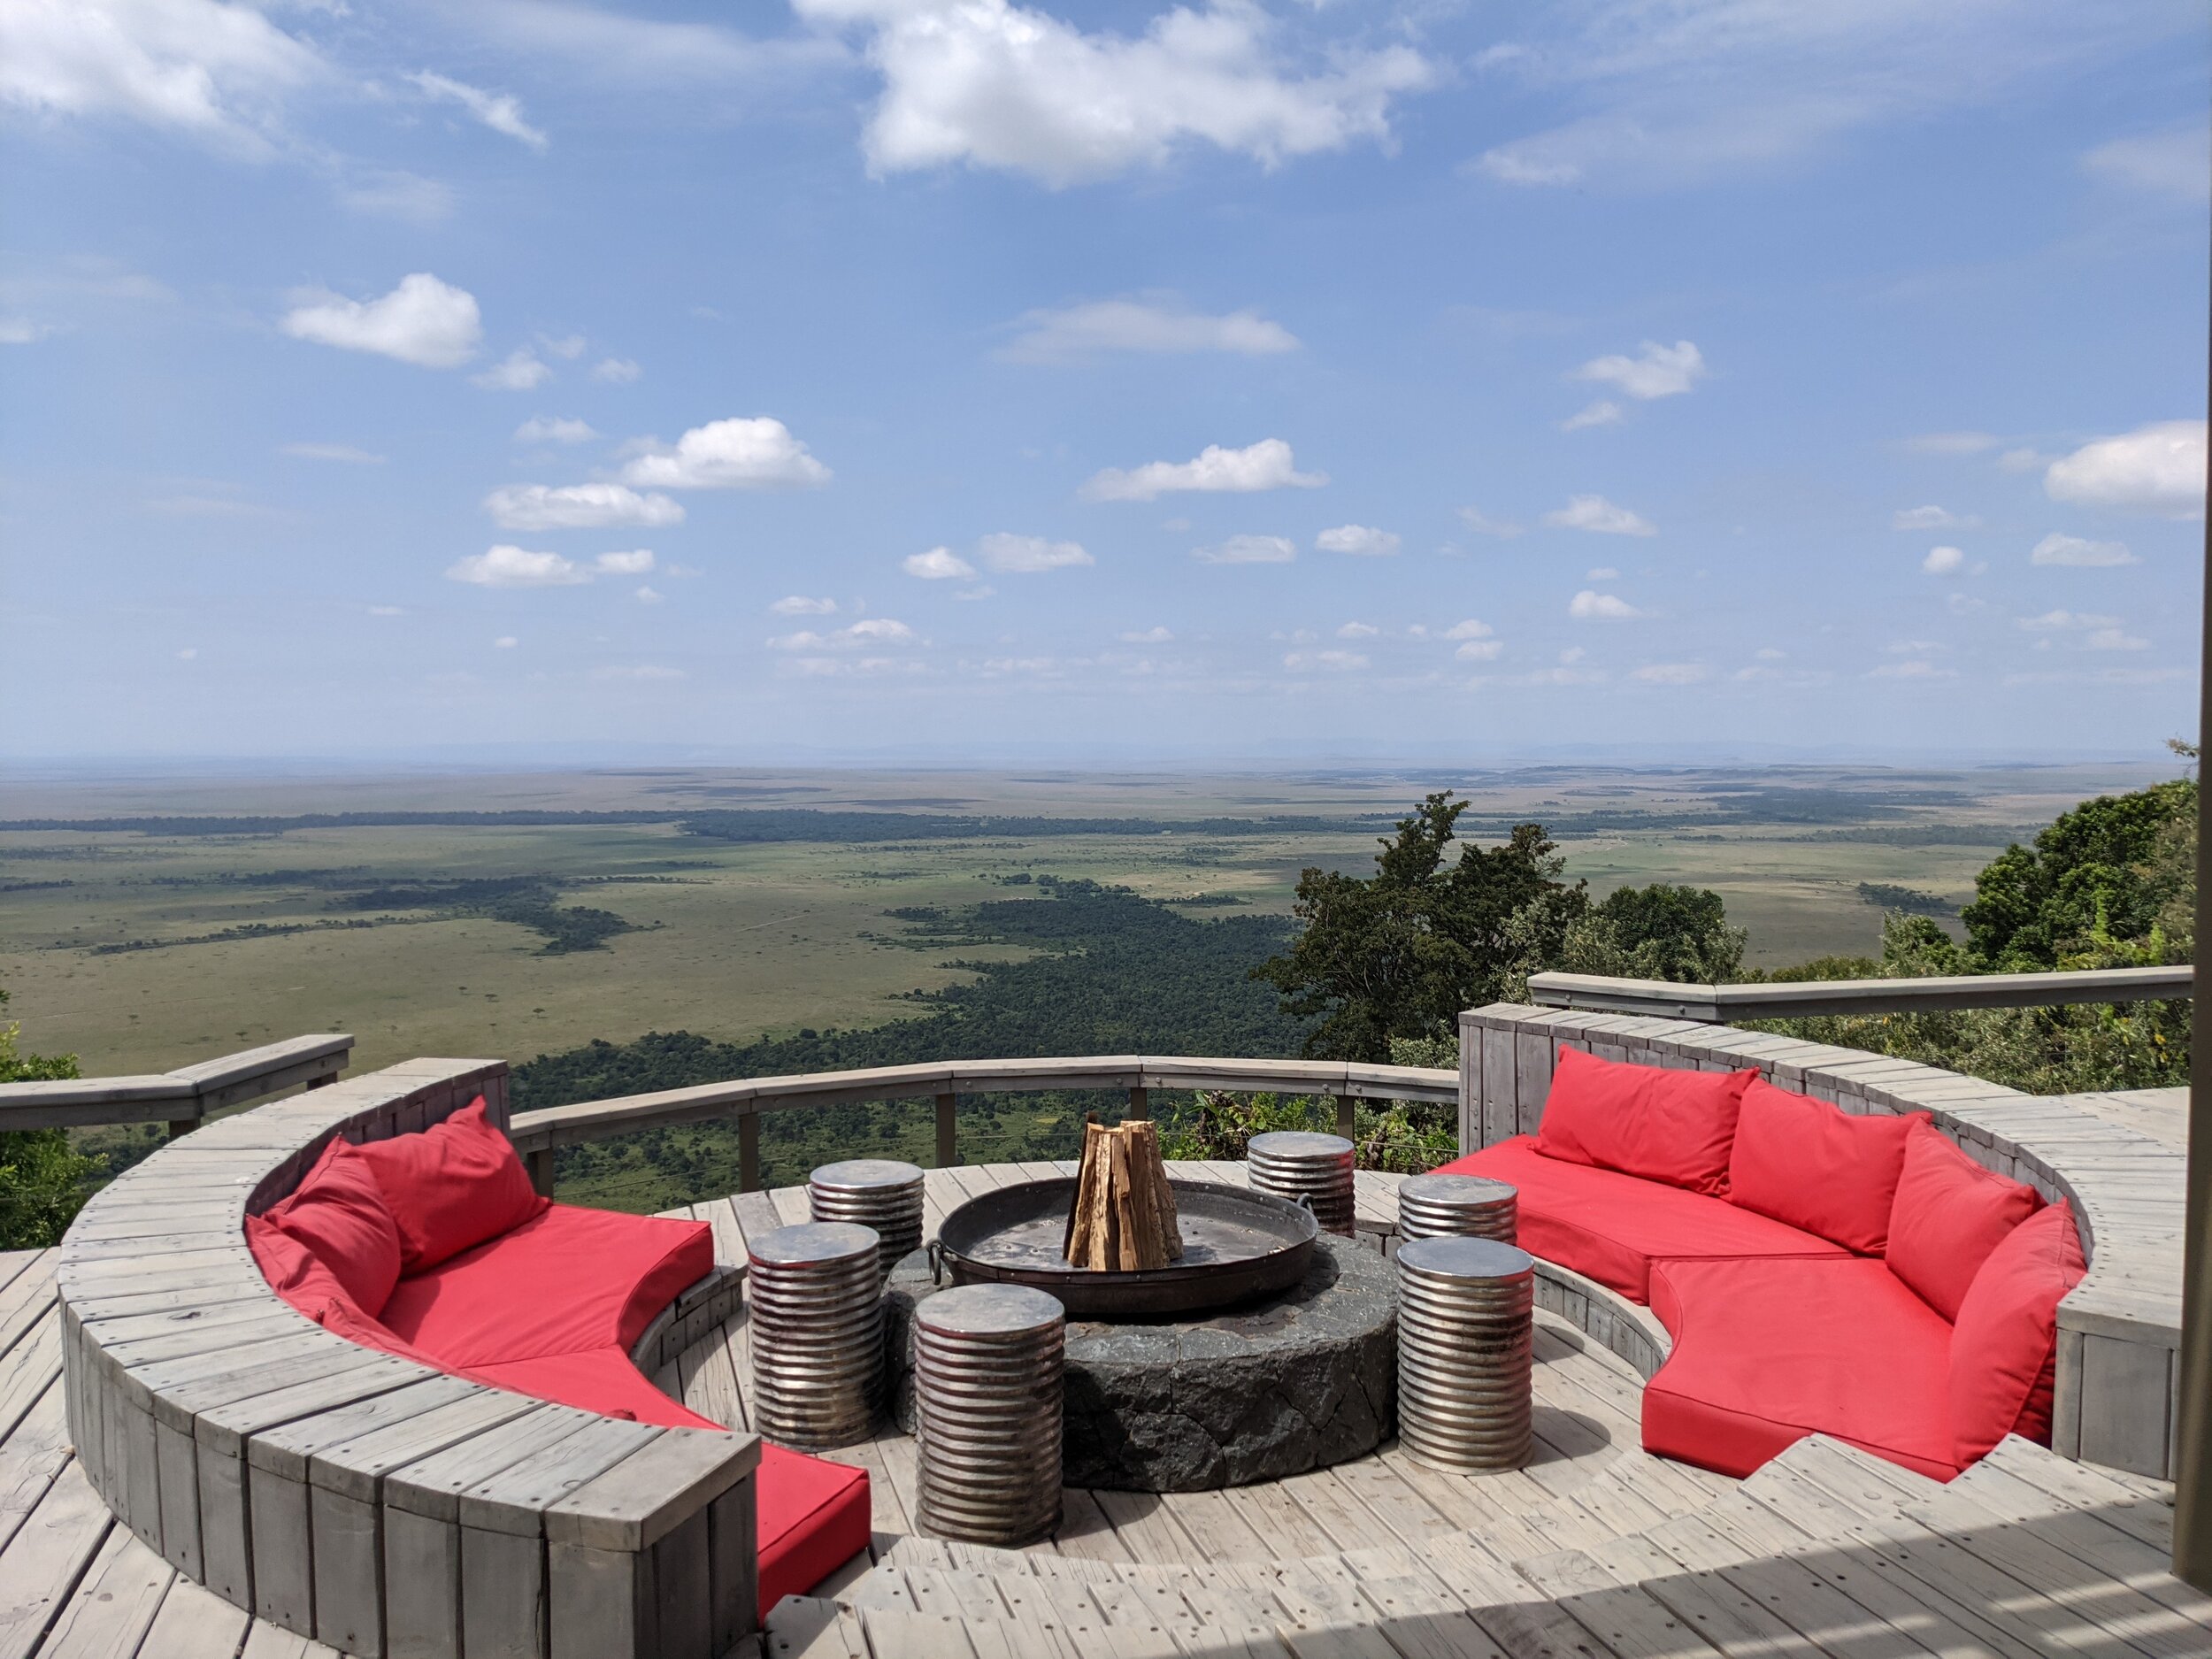  The incredible view from Angama Mara overlooking the Oloololo escarpment 